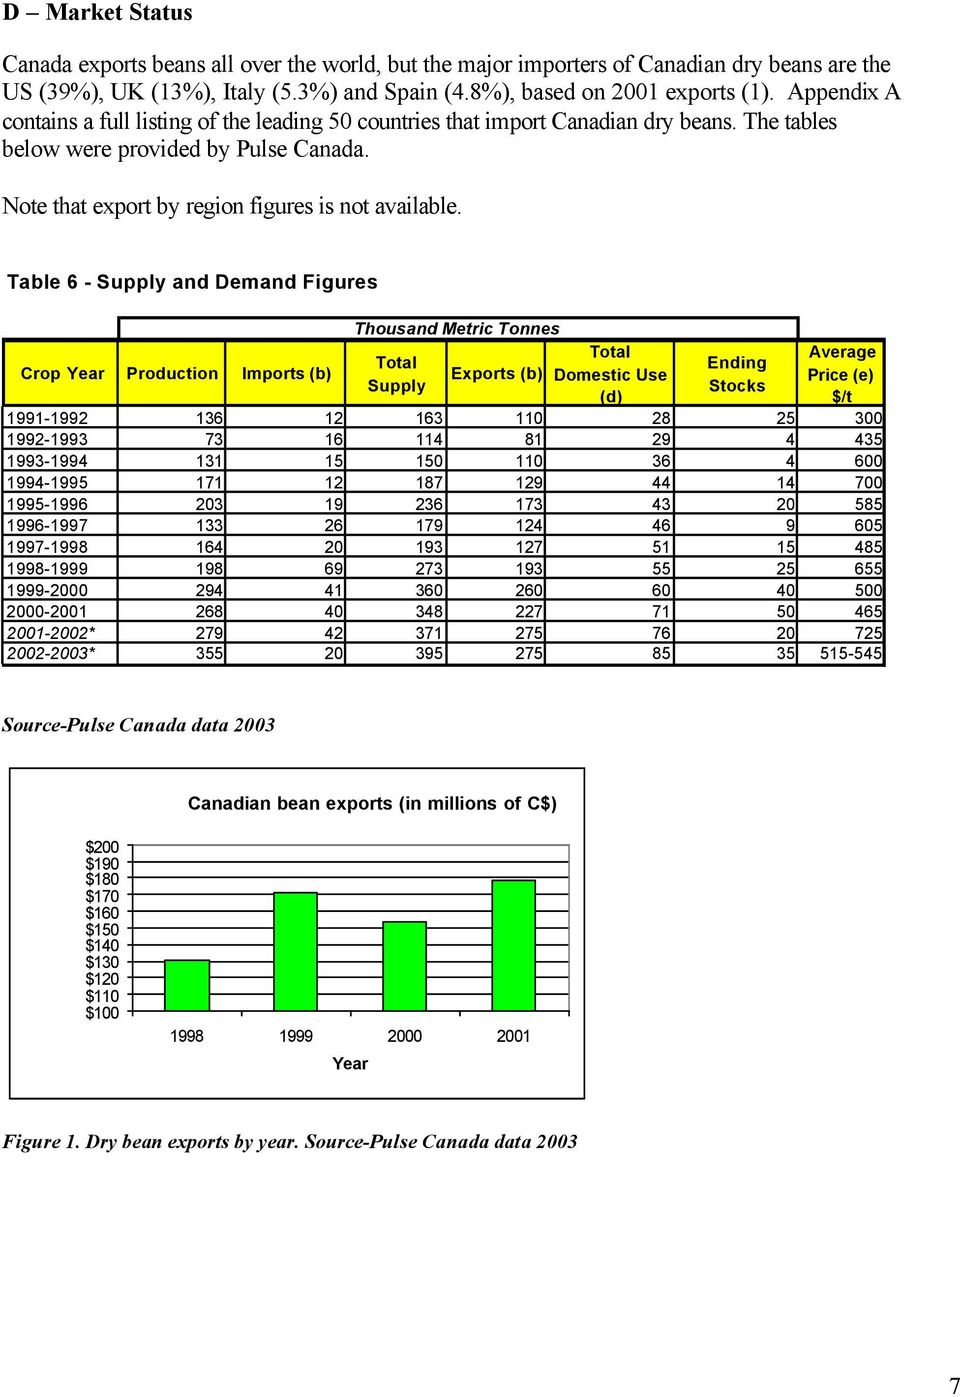 Table 6 - Supply and Demand Figures Crop Year Production Imports (b) Thousand Metric Tonnes Total Supply Exports (b) Total Domestic Use (d) Ending Stocks Average Price (e) $/t 1991-1992 136 12 163